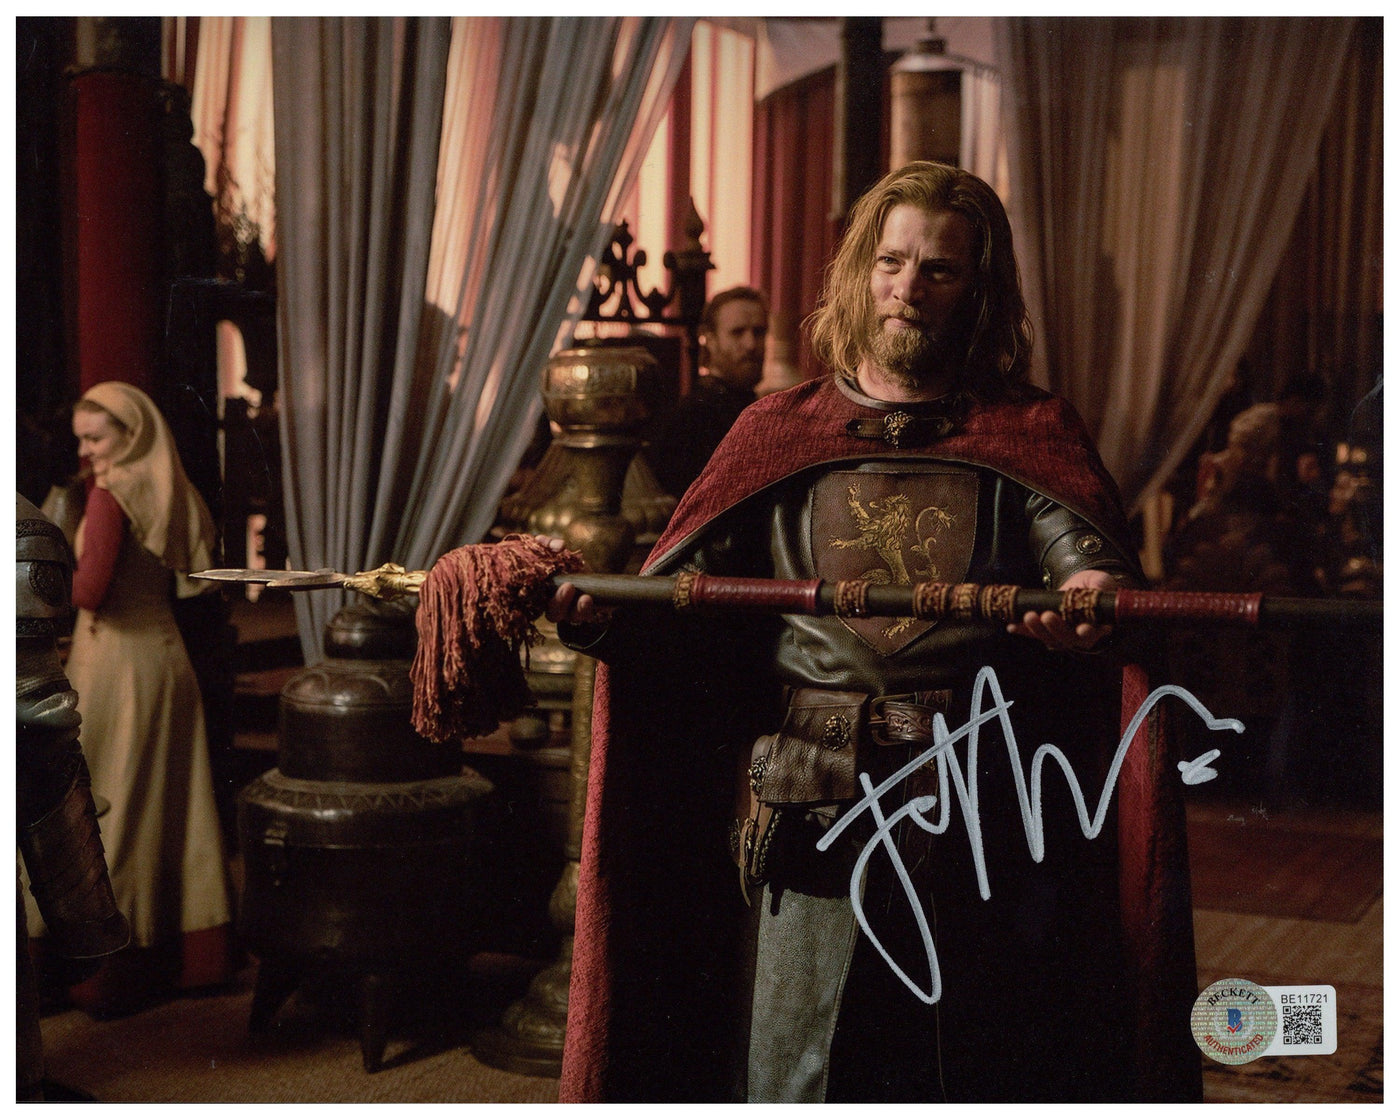 Jefferson Hall Signed 8x10 Photo House of Dragon Ser Tyland Lannister Autographed BAS